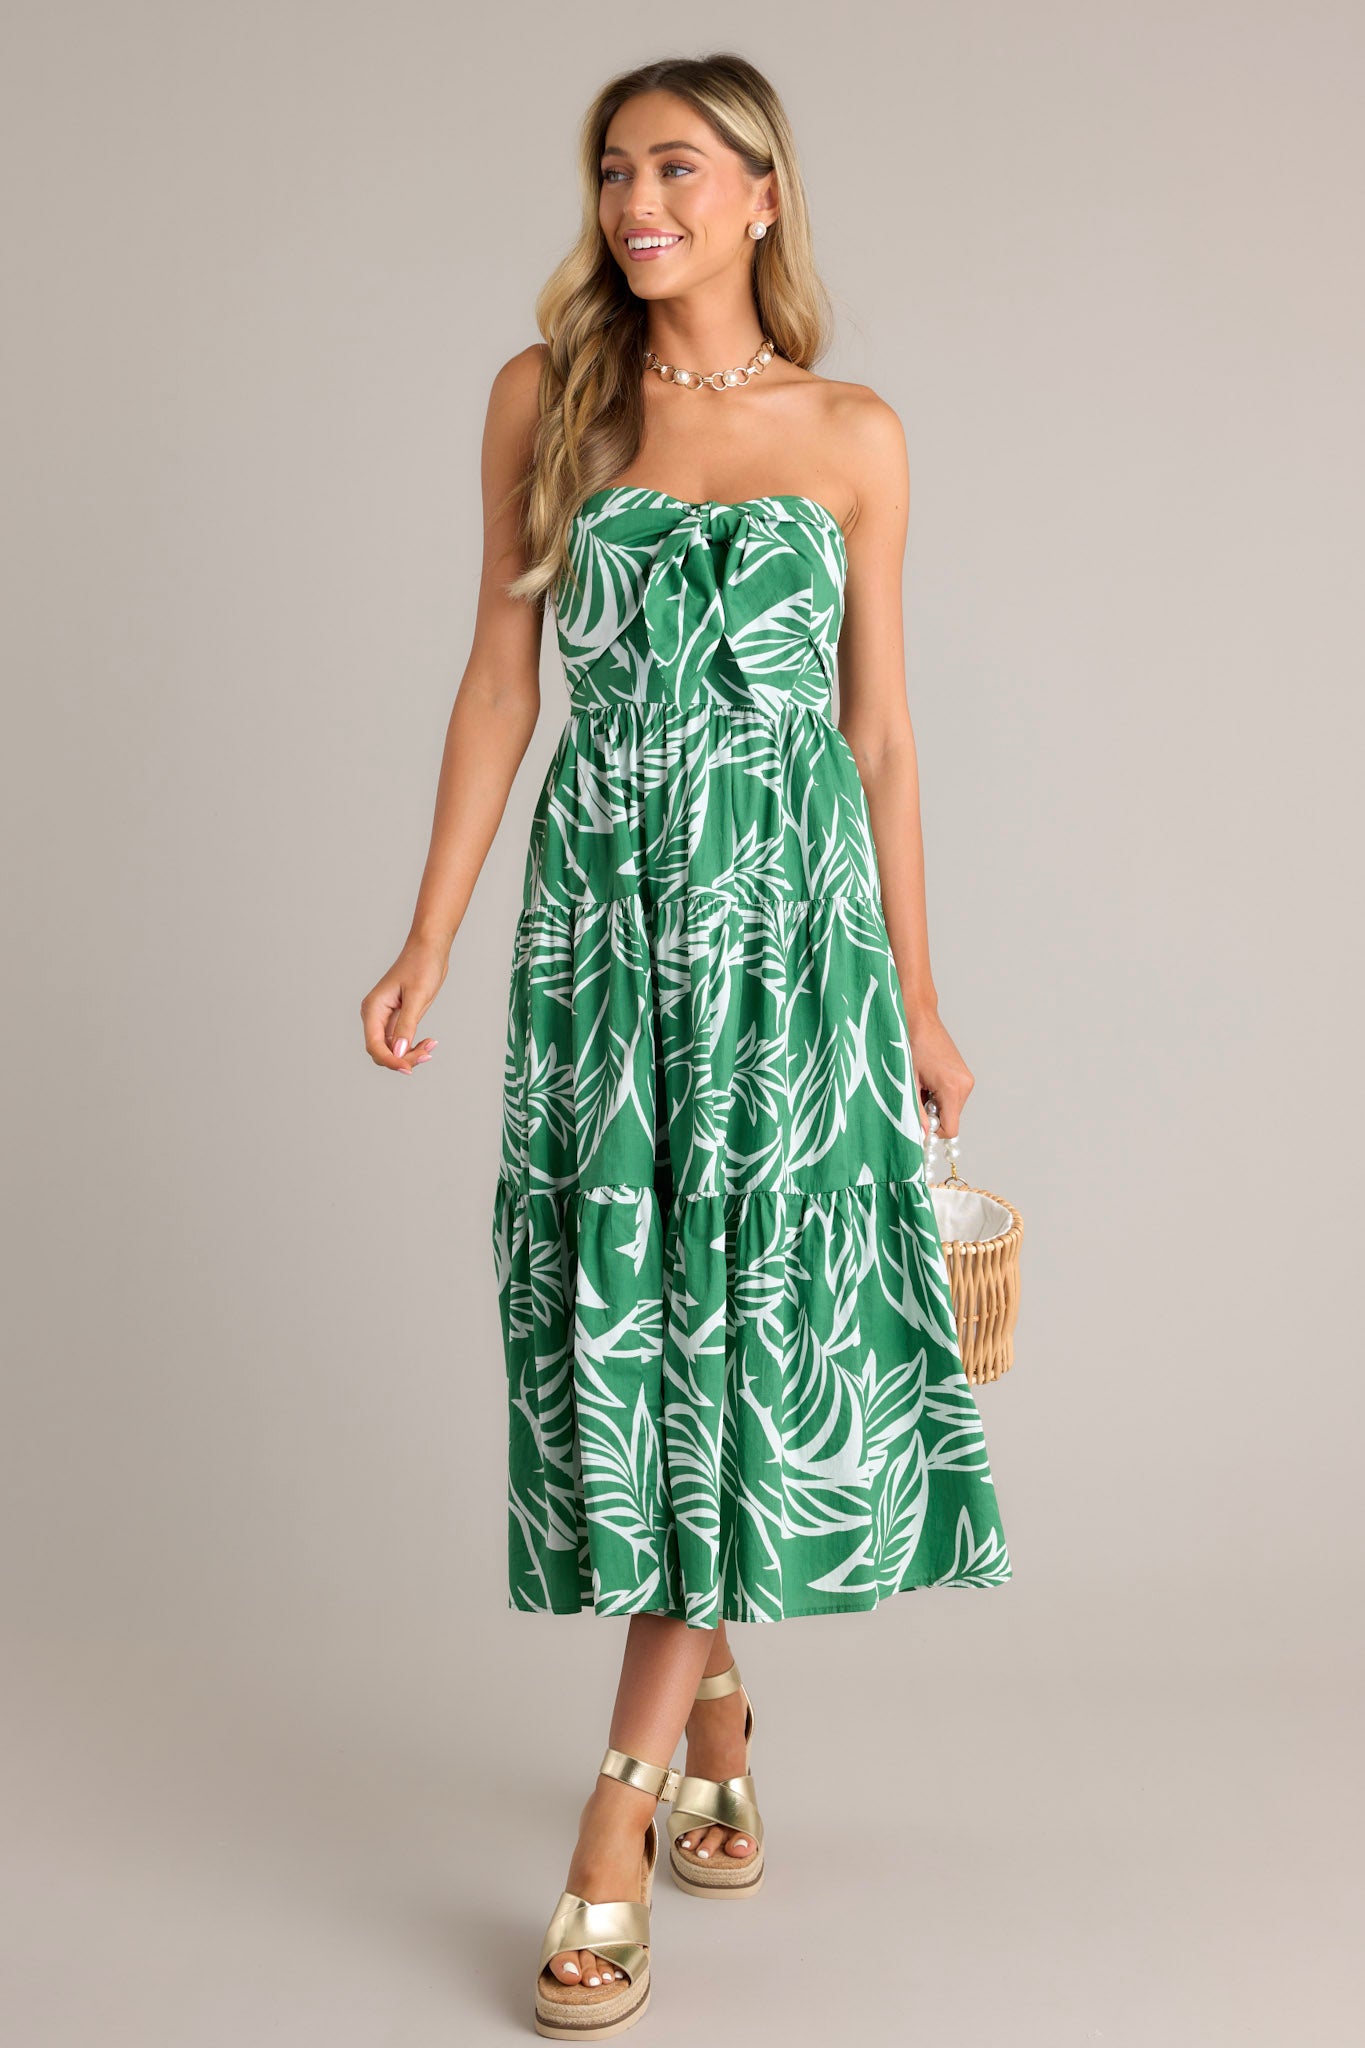 Full length view of a green midi dress with a strapless neckline, boning in the bodice, a self-tie feature, a fully smocked insert in the back, and a tiered design